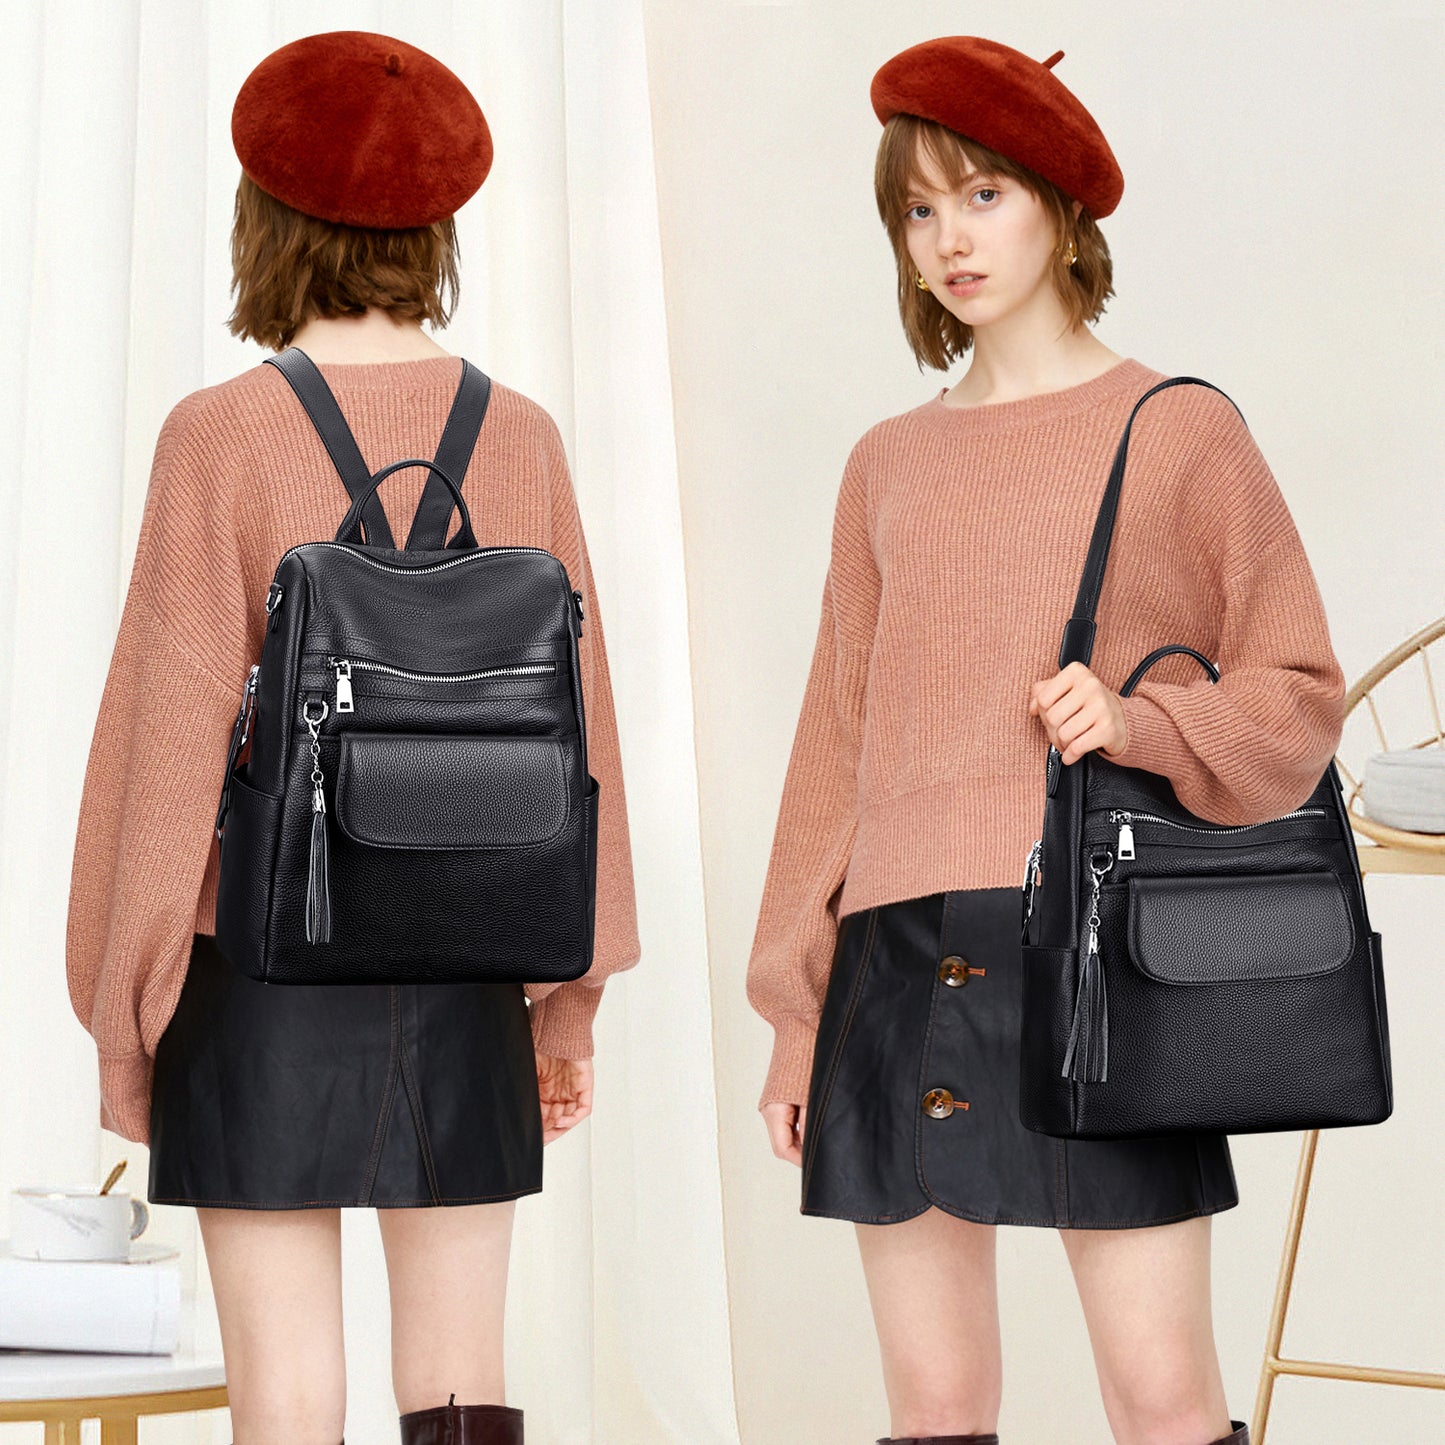 ALTOSY Leather Backpack Purse